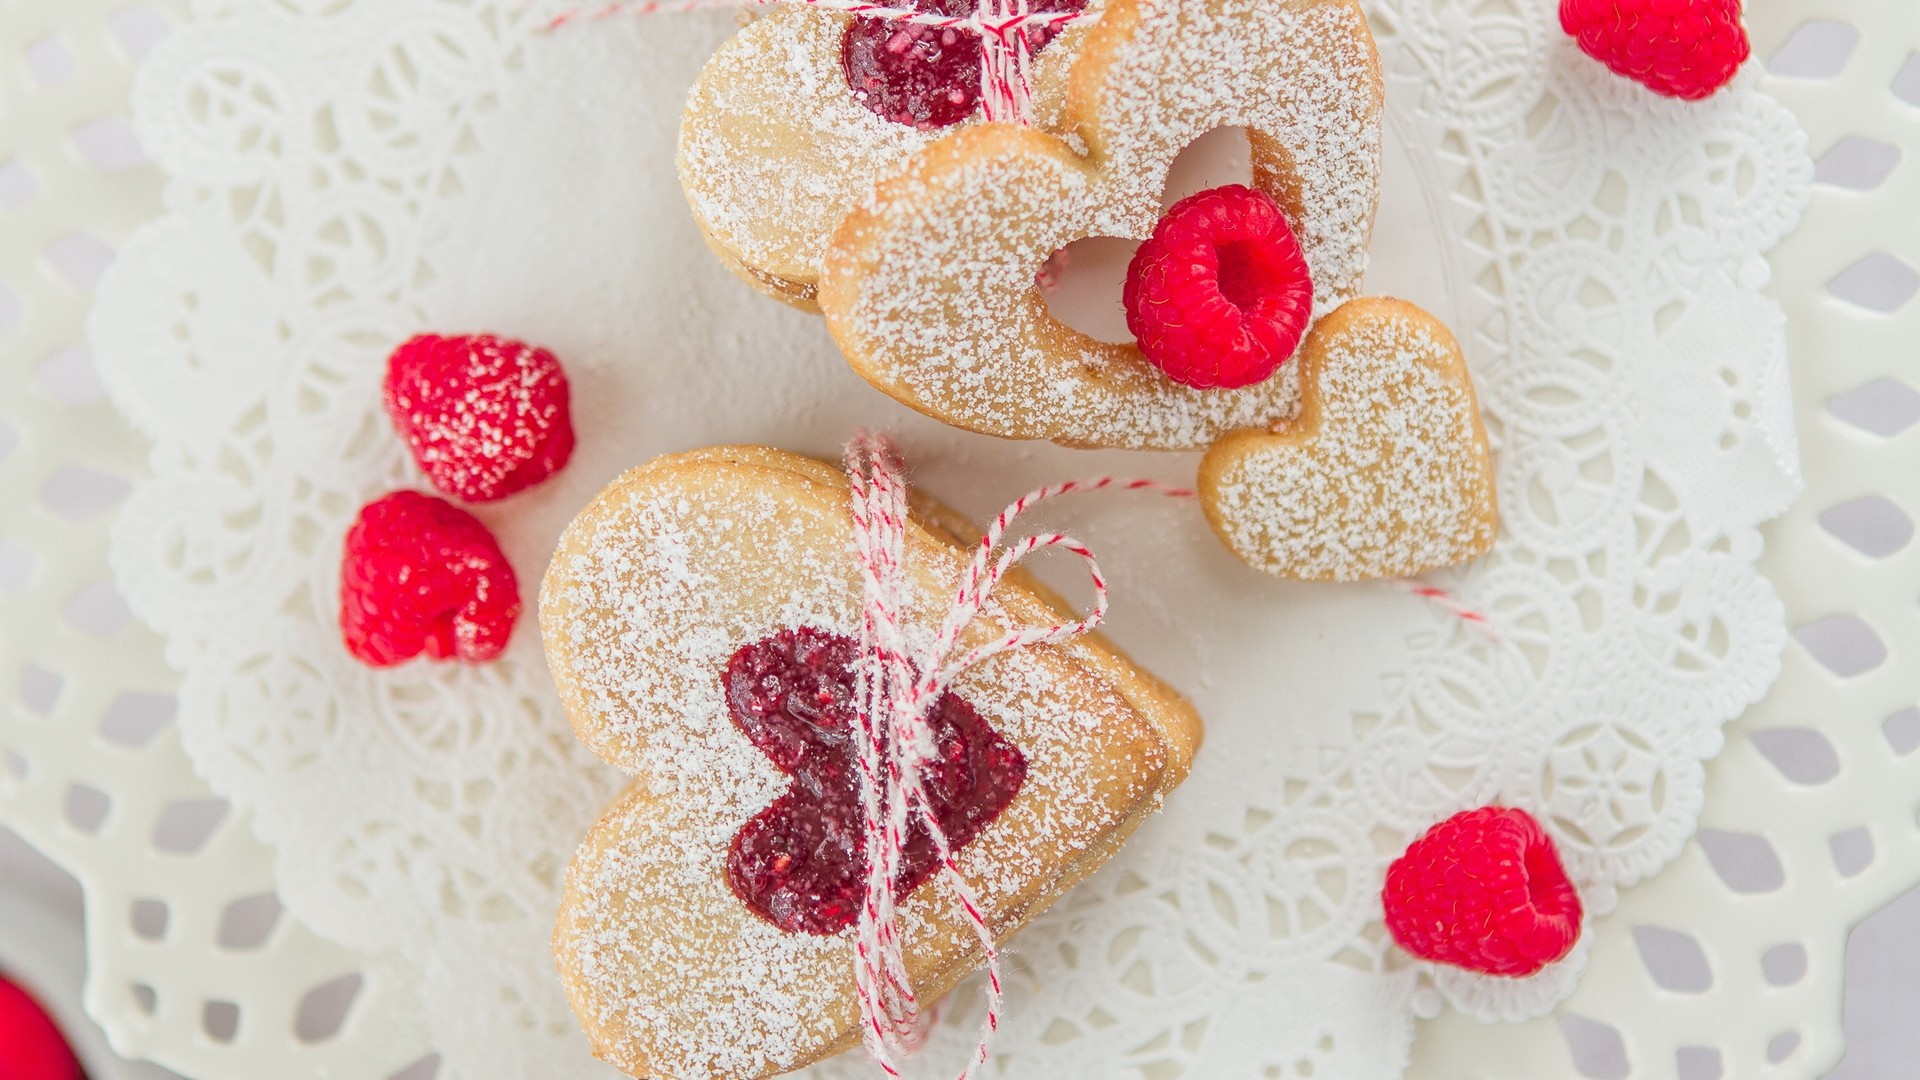 Biscuits With Raspberries And Powdered Sugar Wallpaper